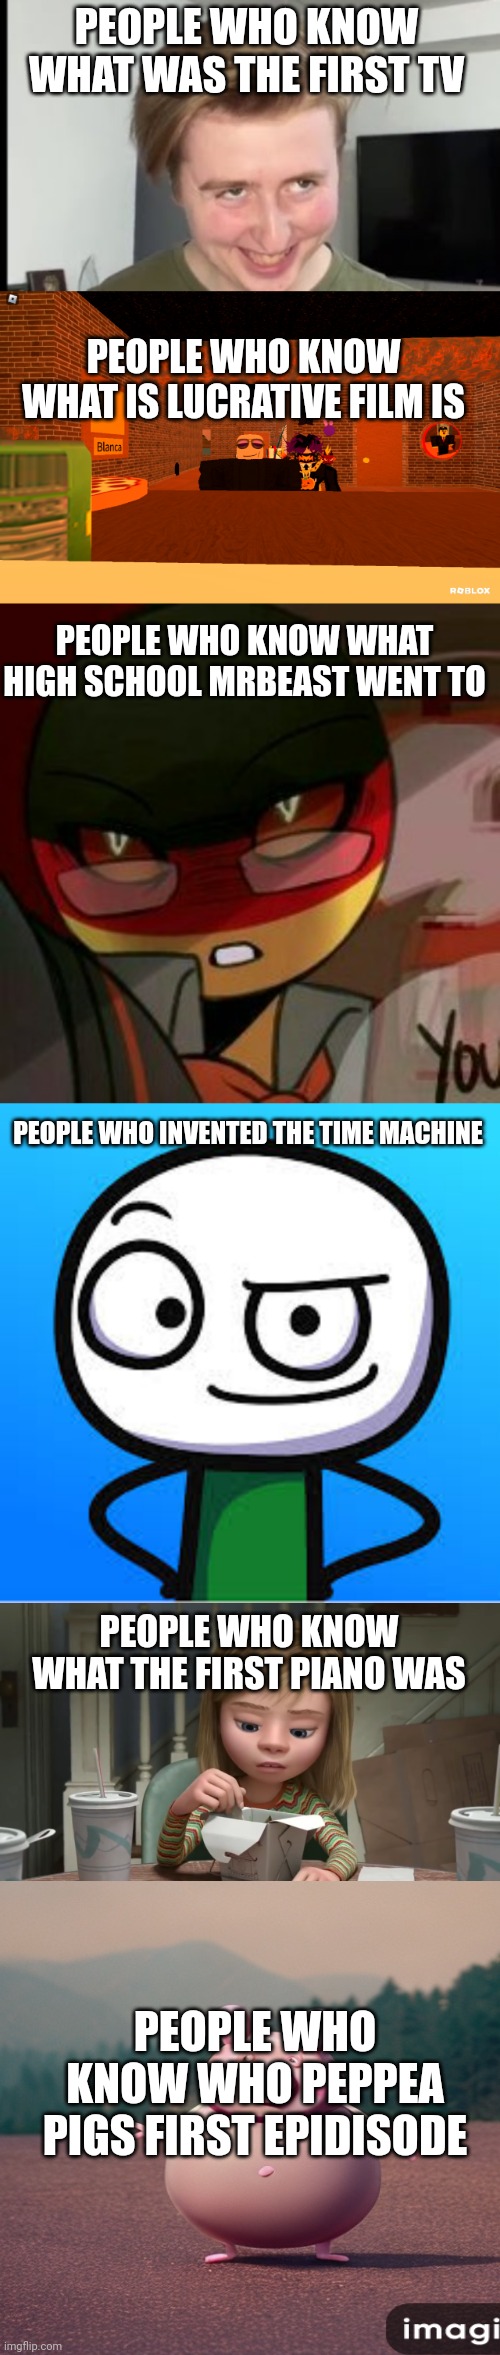 Why | PEOPLE WHO KNOW WHAT WAS THE FIRST TV; PEOPLE WHO KNOW WHAT IS LUCRATIVE FILM IS; PEOPLE WHO KNOW WHAT HIGH SCHOOL MRBEAST WENT TO; PEOPLE WHO INVENTED THE TIME MACHINE; PEOPLE WHO KNOW WHAT THE FIRST PIANO WAS; PEOPLE WHO KNOW WHO PEPPEA PIGS FIRST EPIDISODE | image tagged in the face,why,lol,funny,memes,funny memes | made w/ Imgflip meme maker